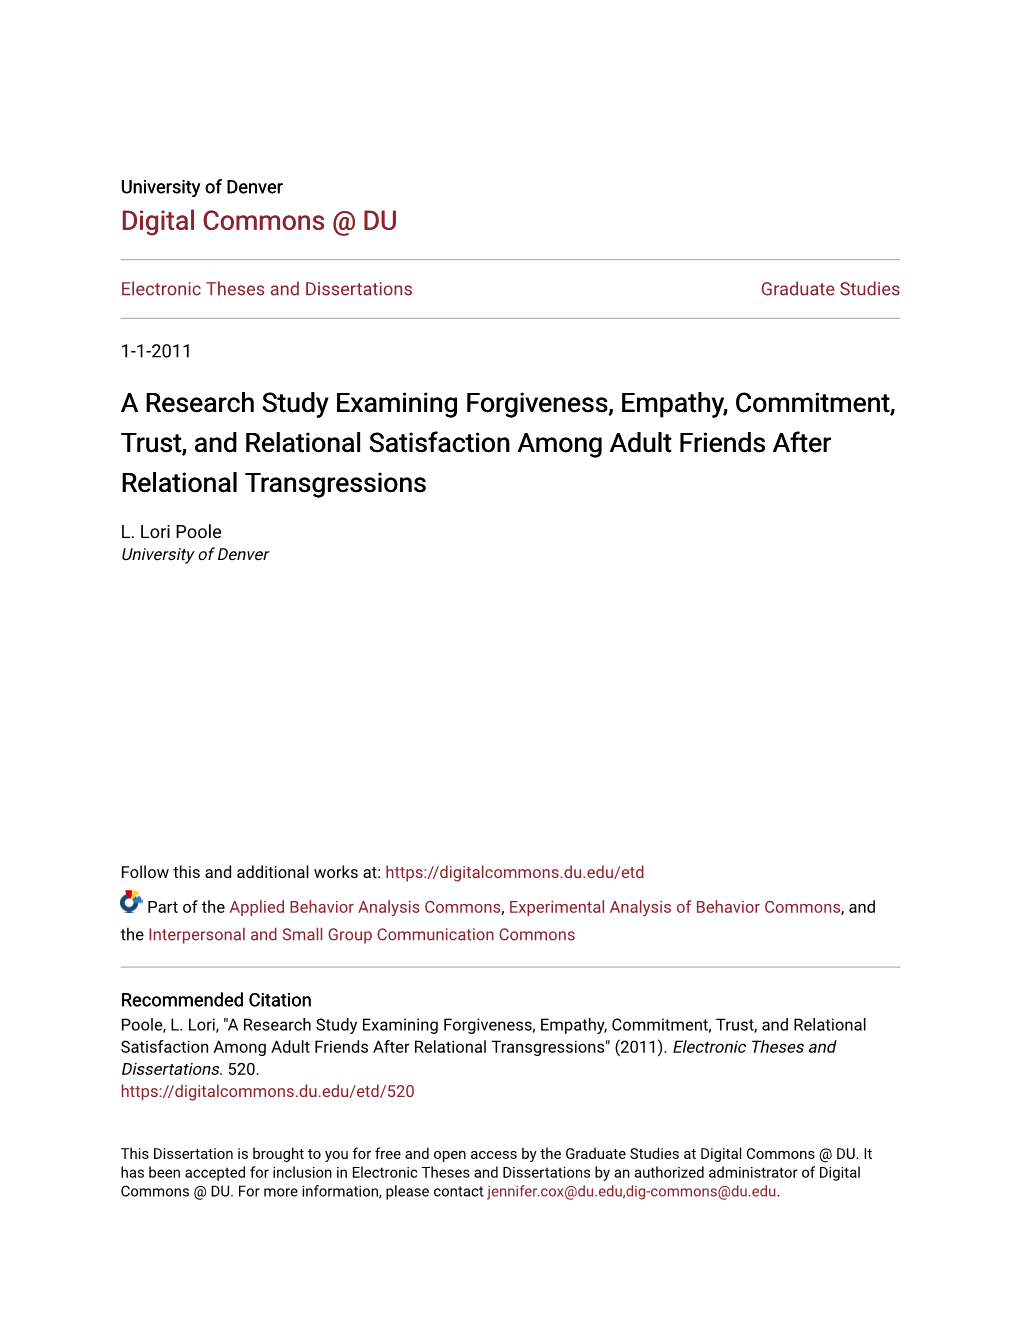 A Research Study Examining Forgiveness, Empathy, Commitment, Trust, and Relational Satisfaction Among Adult Friends After Relational Transgressions